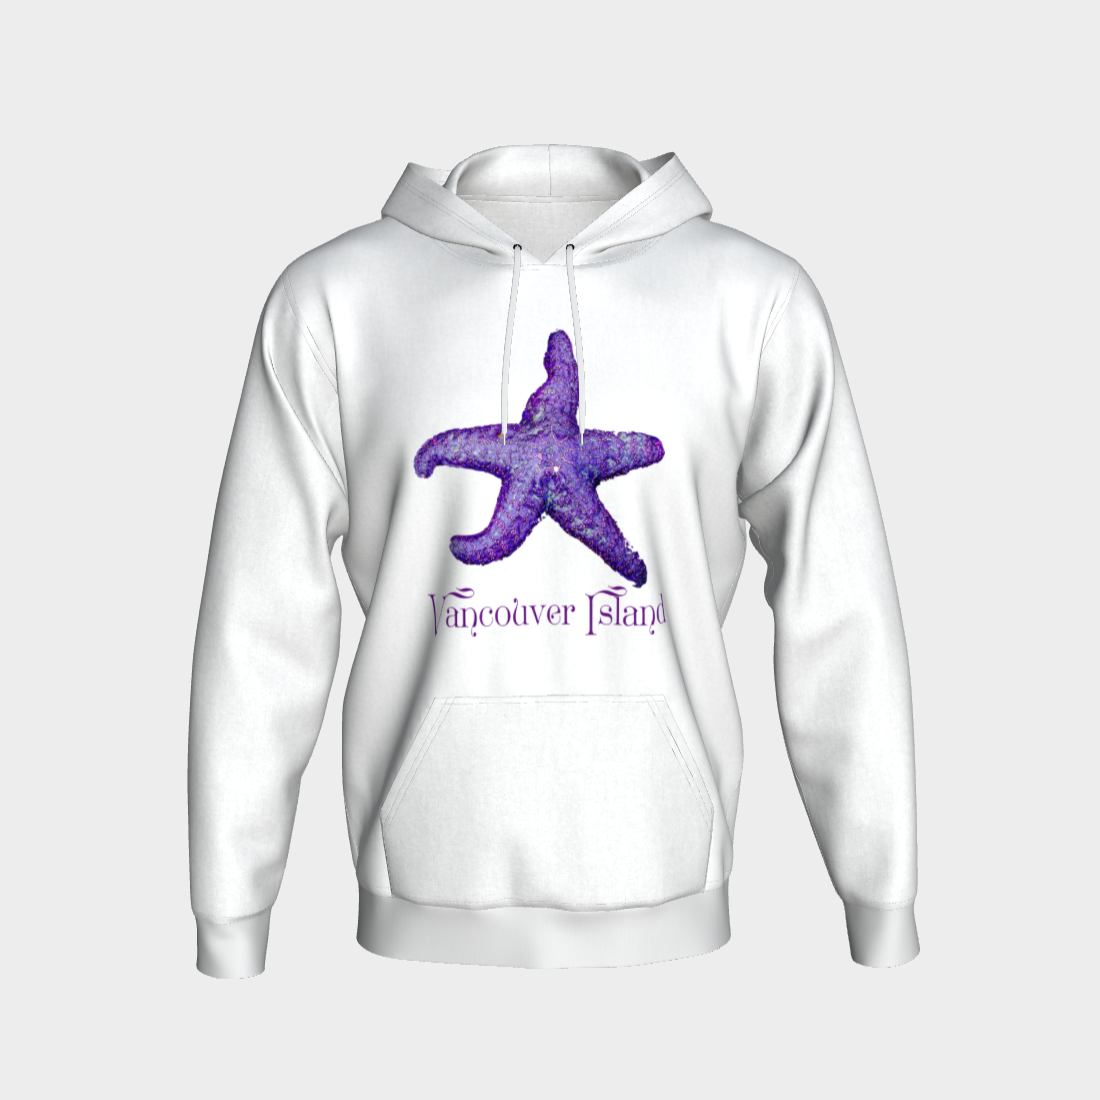 Starfish Vancouver Island Unisex Pullover Hoodie Your Van Isle Goddess unisex pullover hoodie is a great classic hoodie!  Created with state of the art tri-tex material which is a non-shrink poly middle encased in two layers of ultra soft cotton face and lining.  Features:  super cozy fluffy cotton lining double fleece lined hood kangaroo pocket flat drawcord non shrink fabric unisex fit designed to suit diverse body types